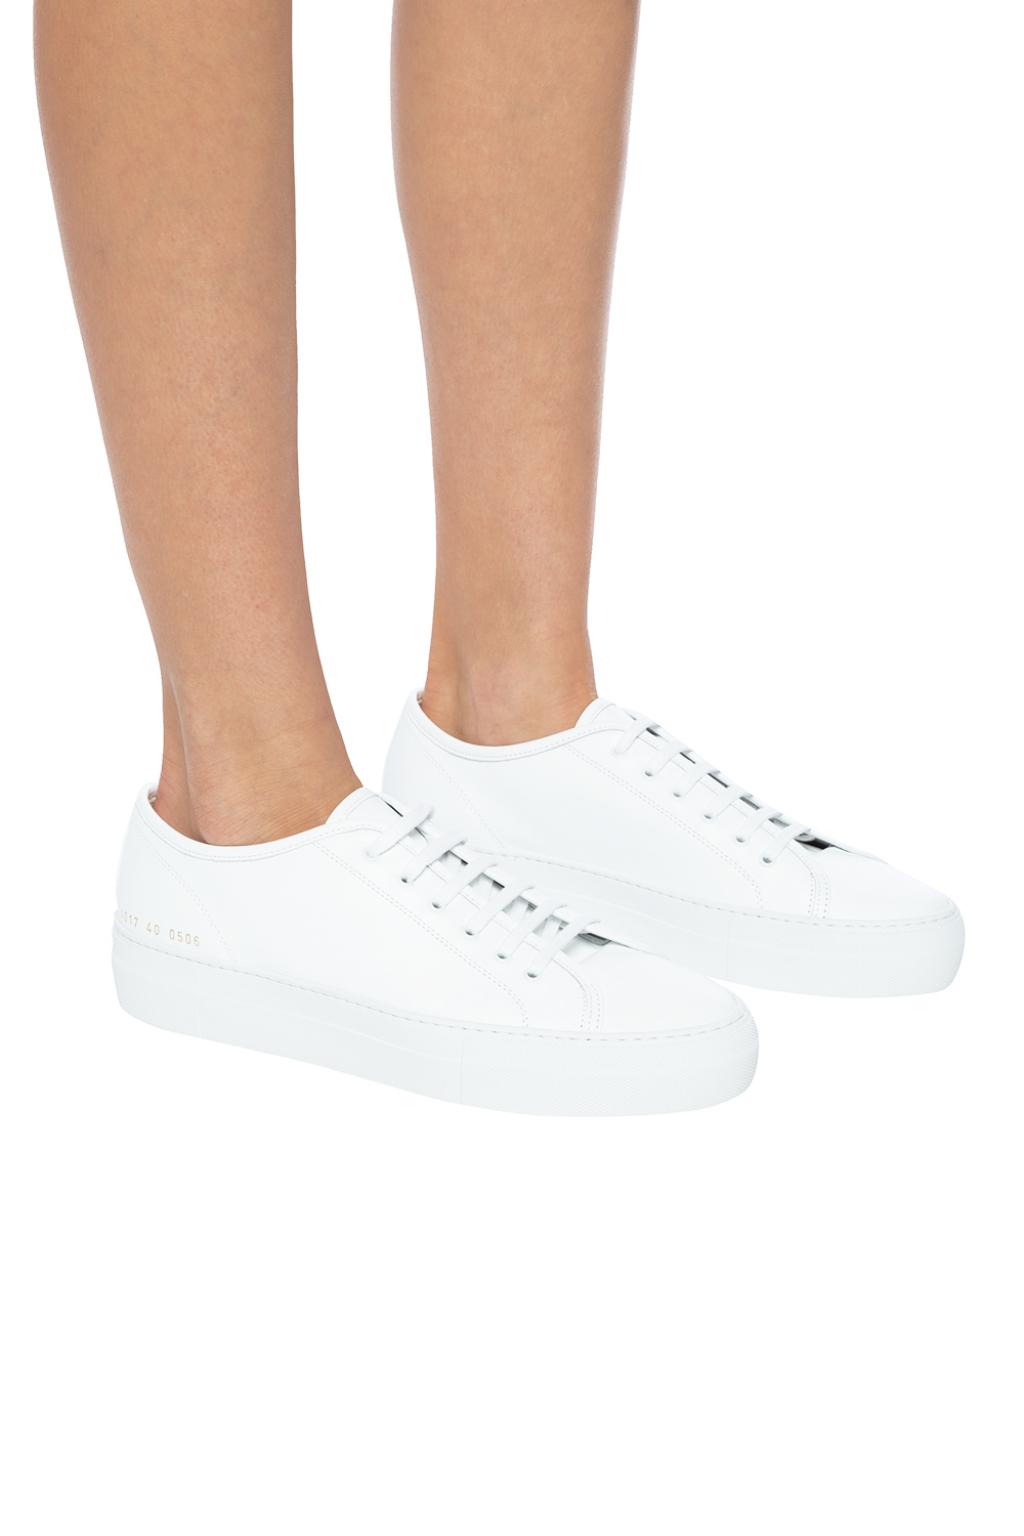 Common Projects 'Tournament' sneakers